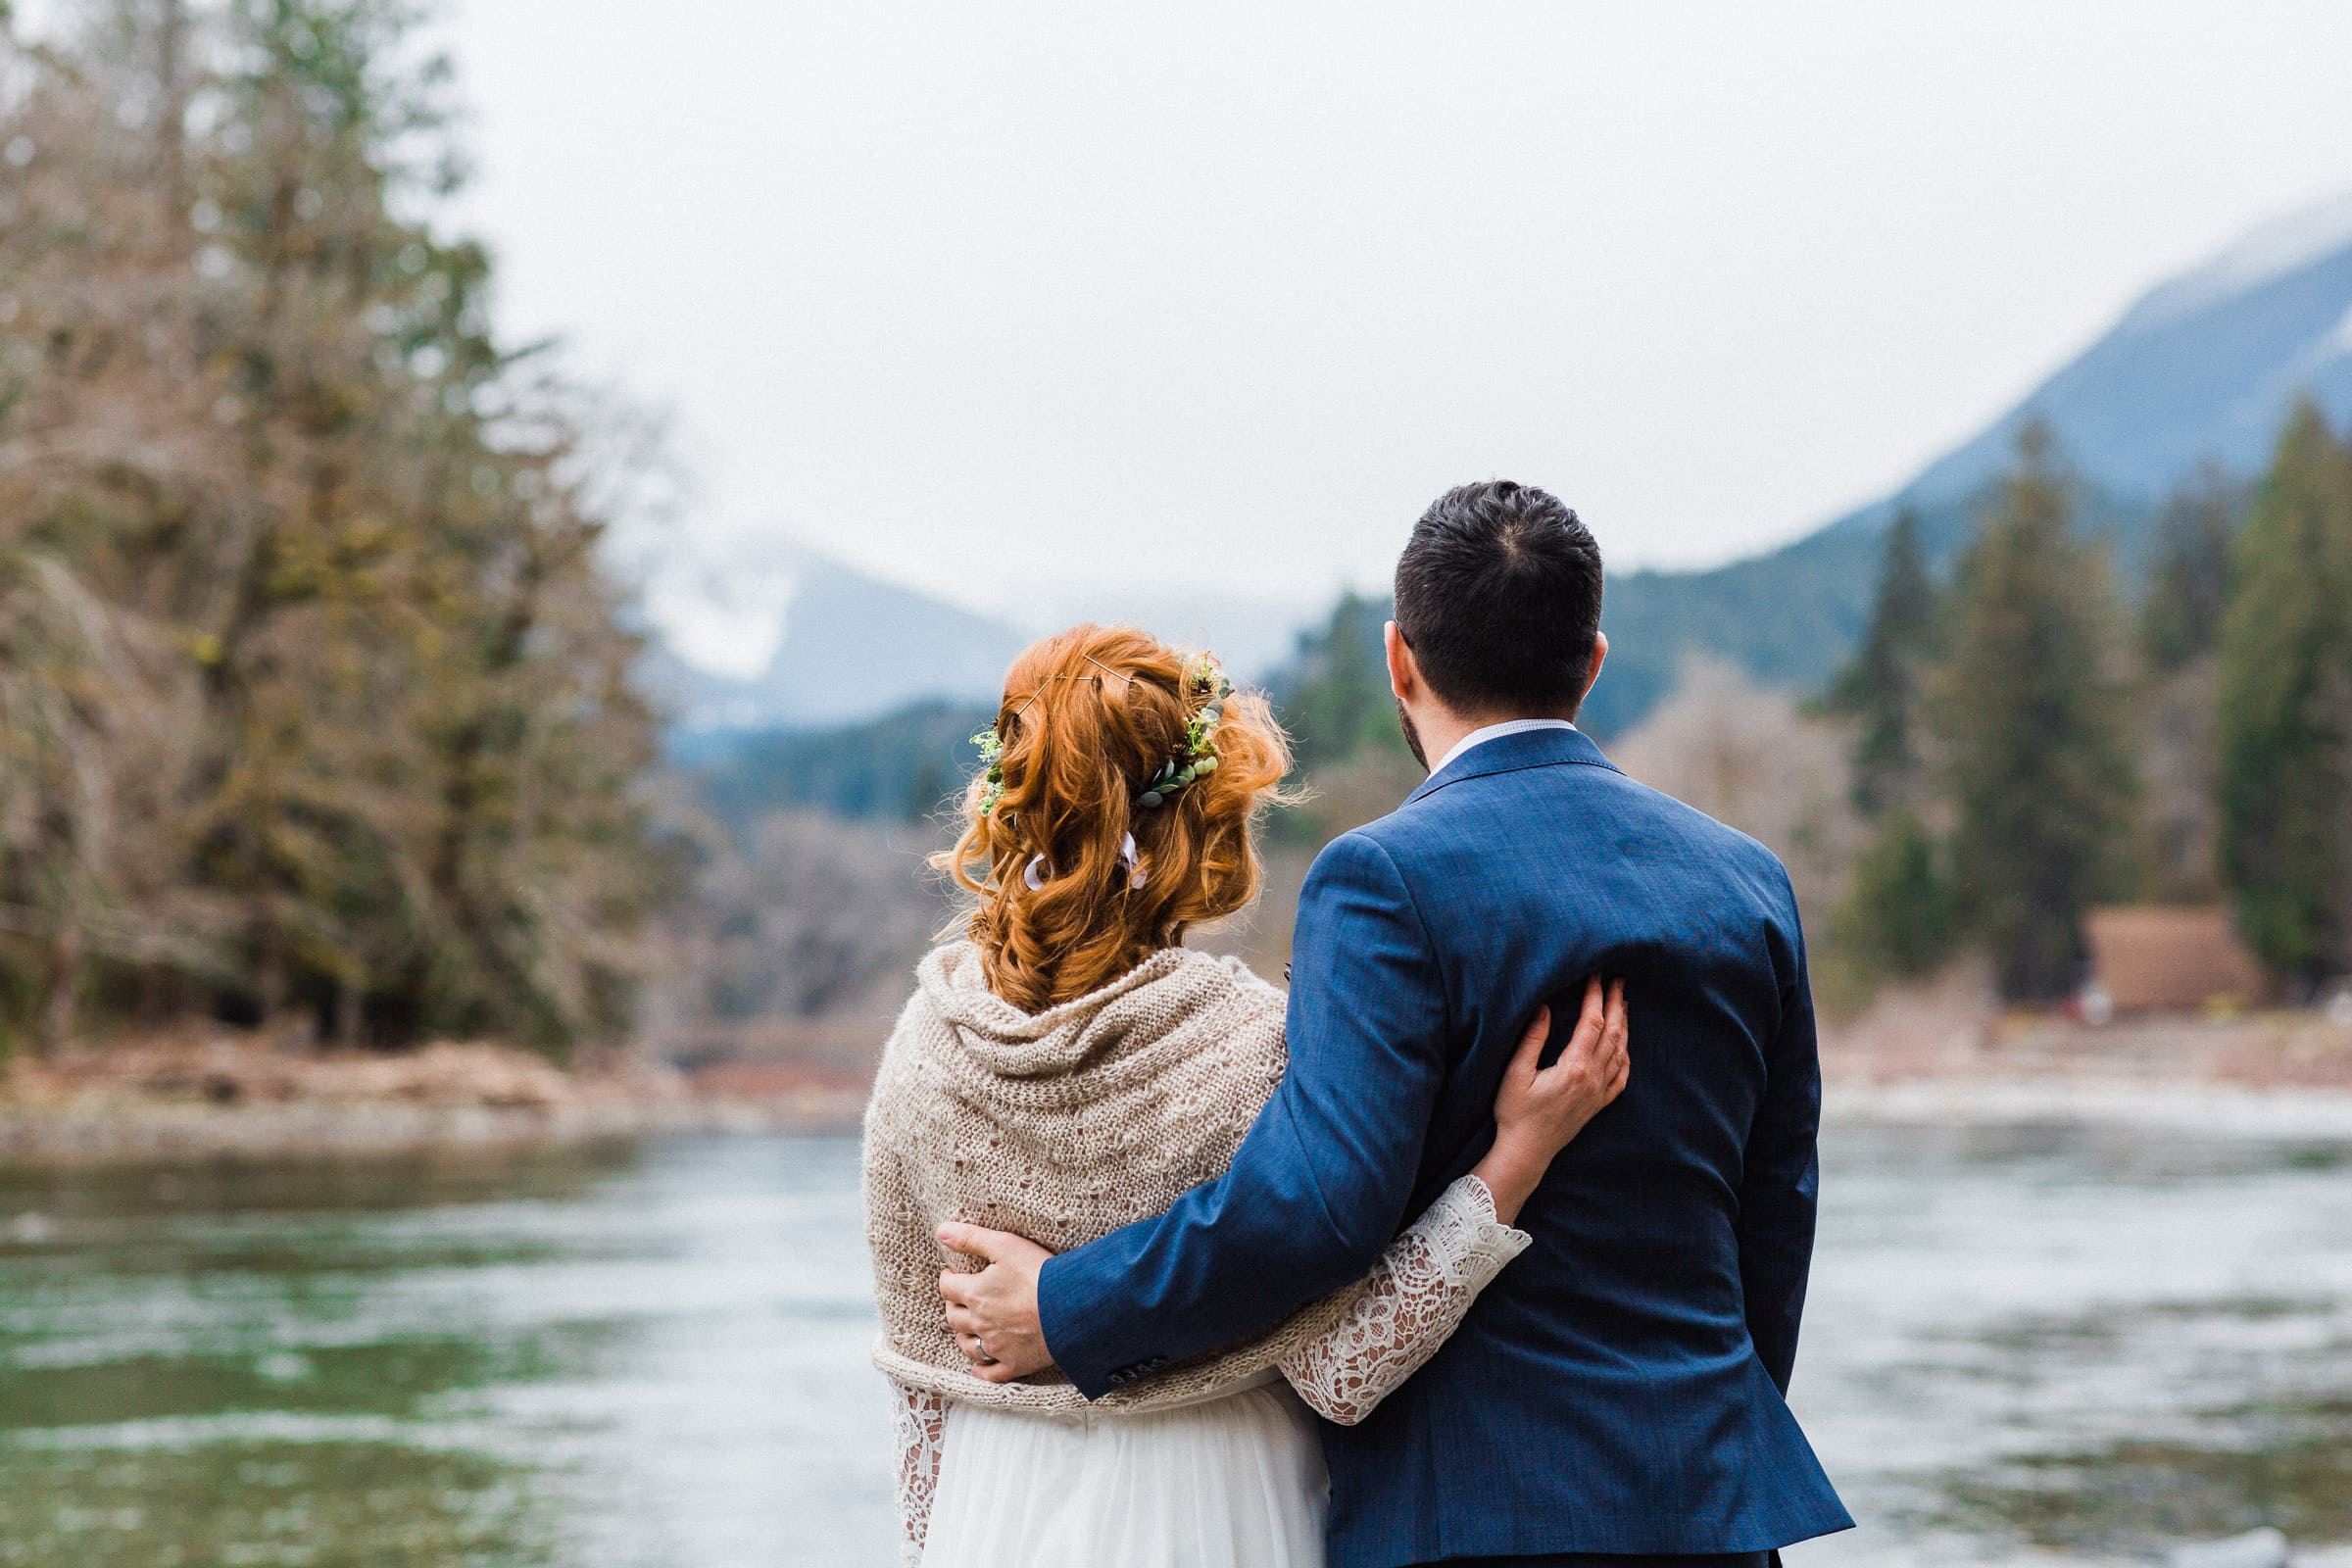 couple with backs to camera, looking over a river in the mountains